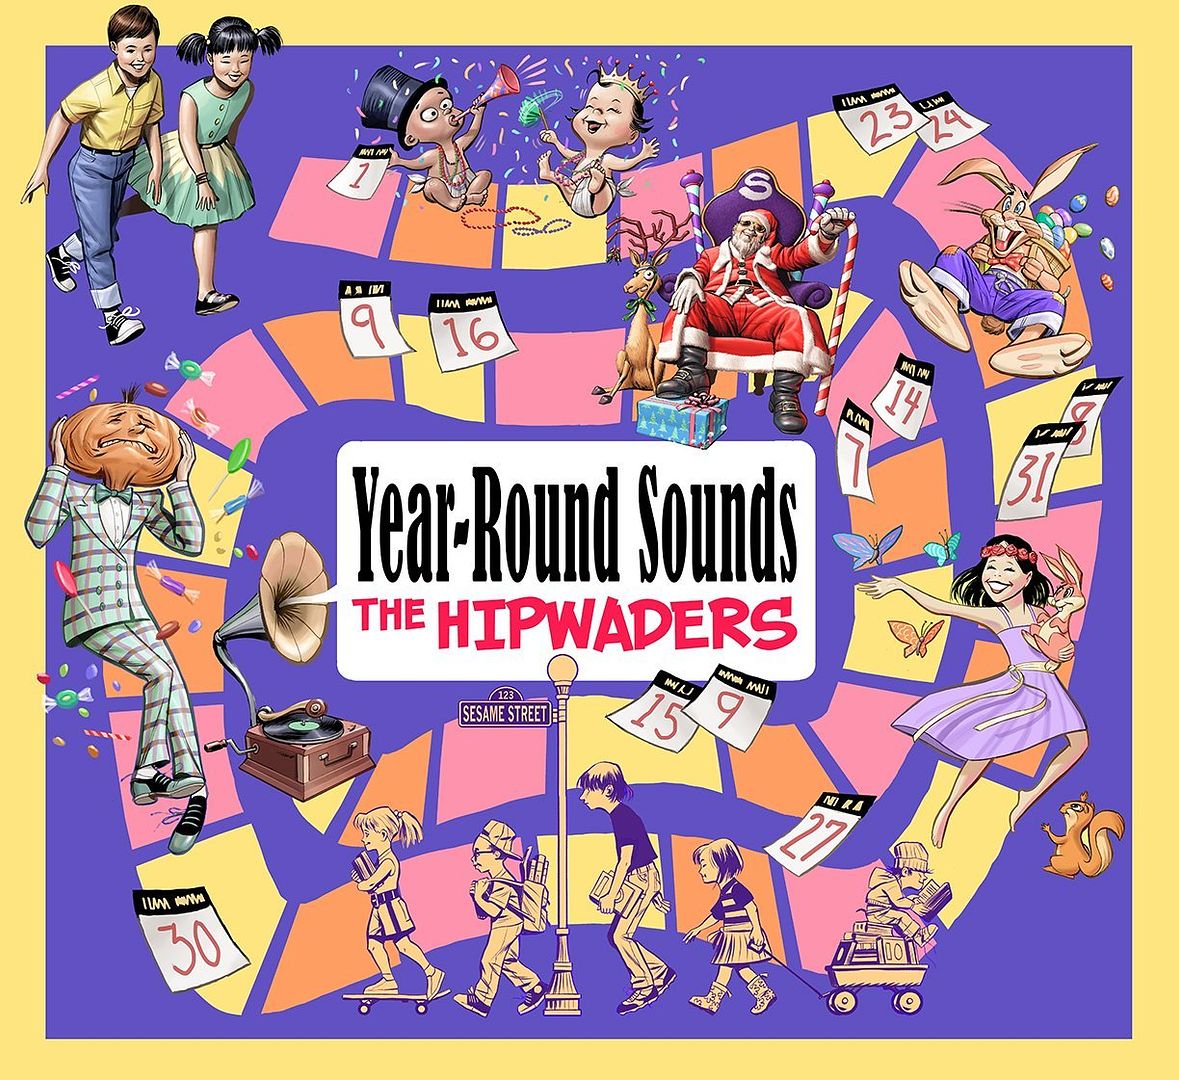 Music for kids: The Hipwaders' Year-Round Sounds